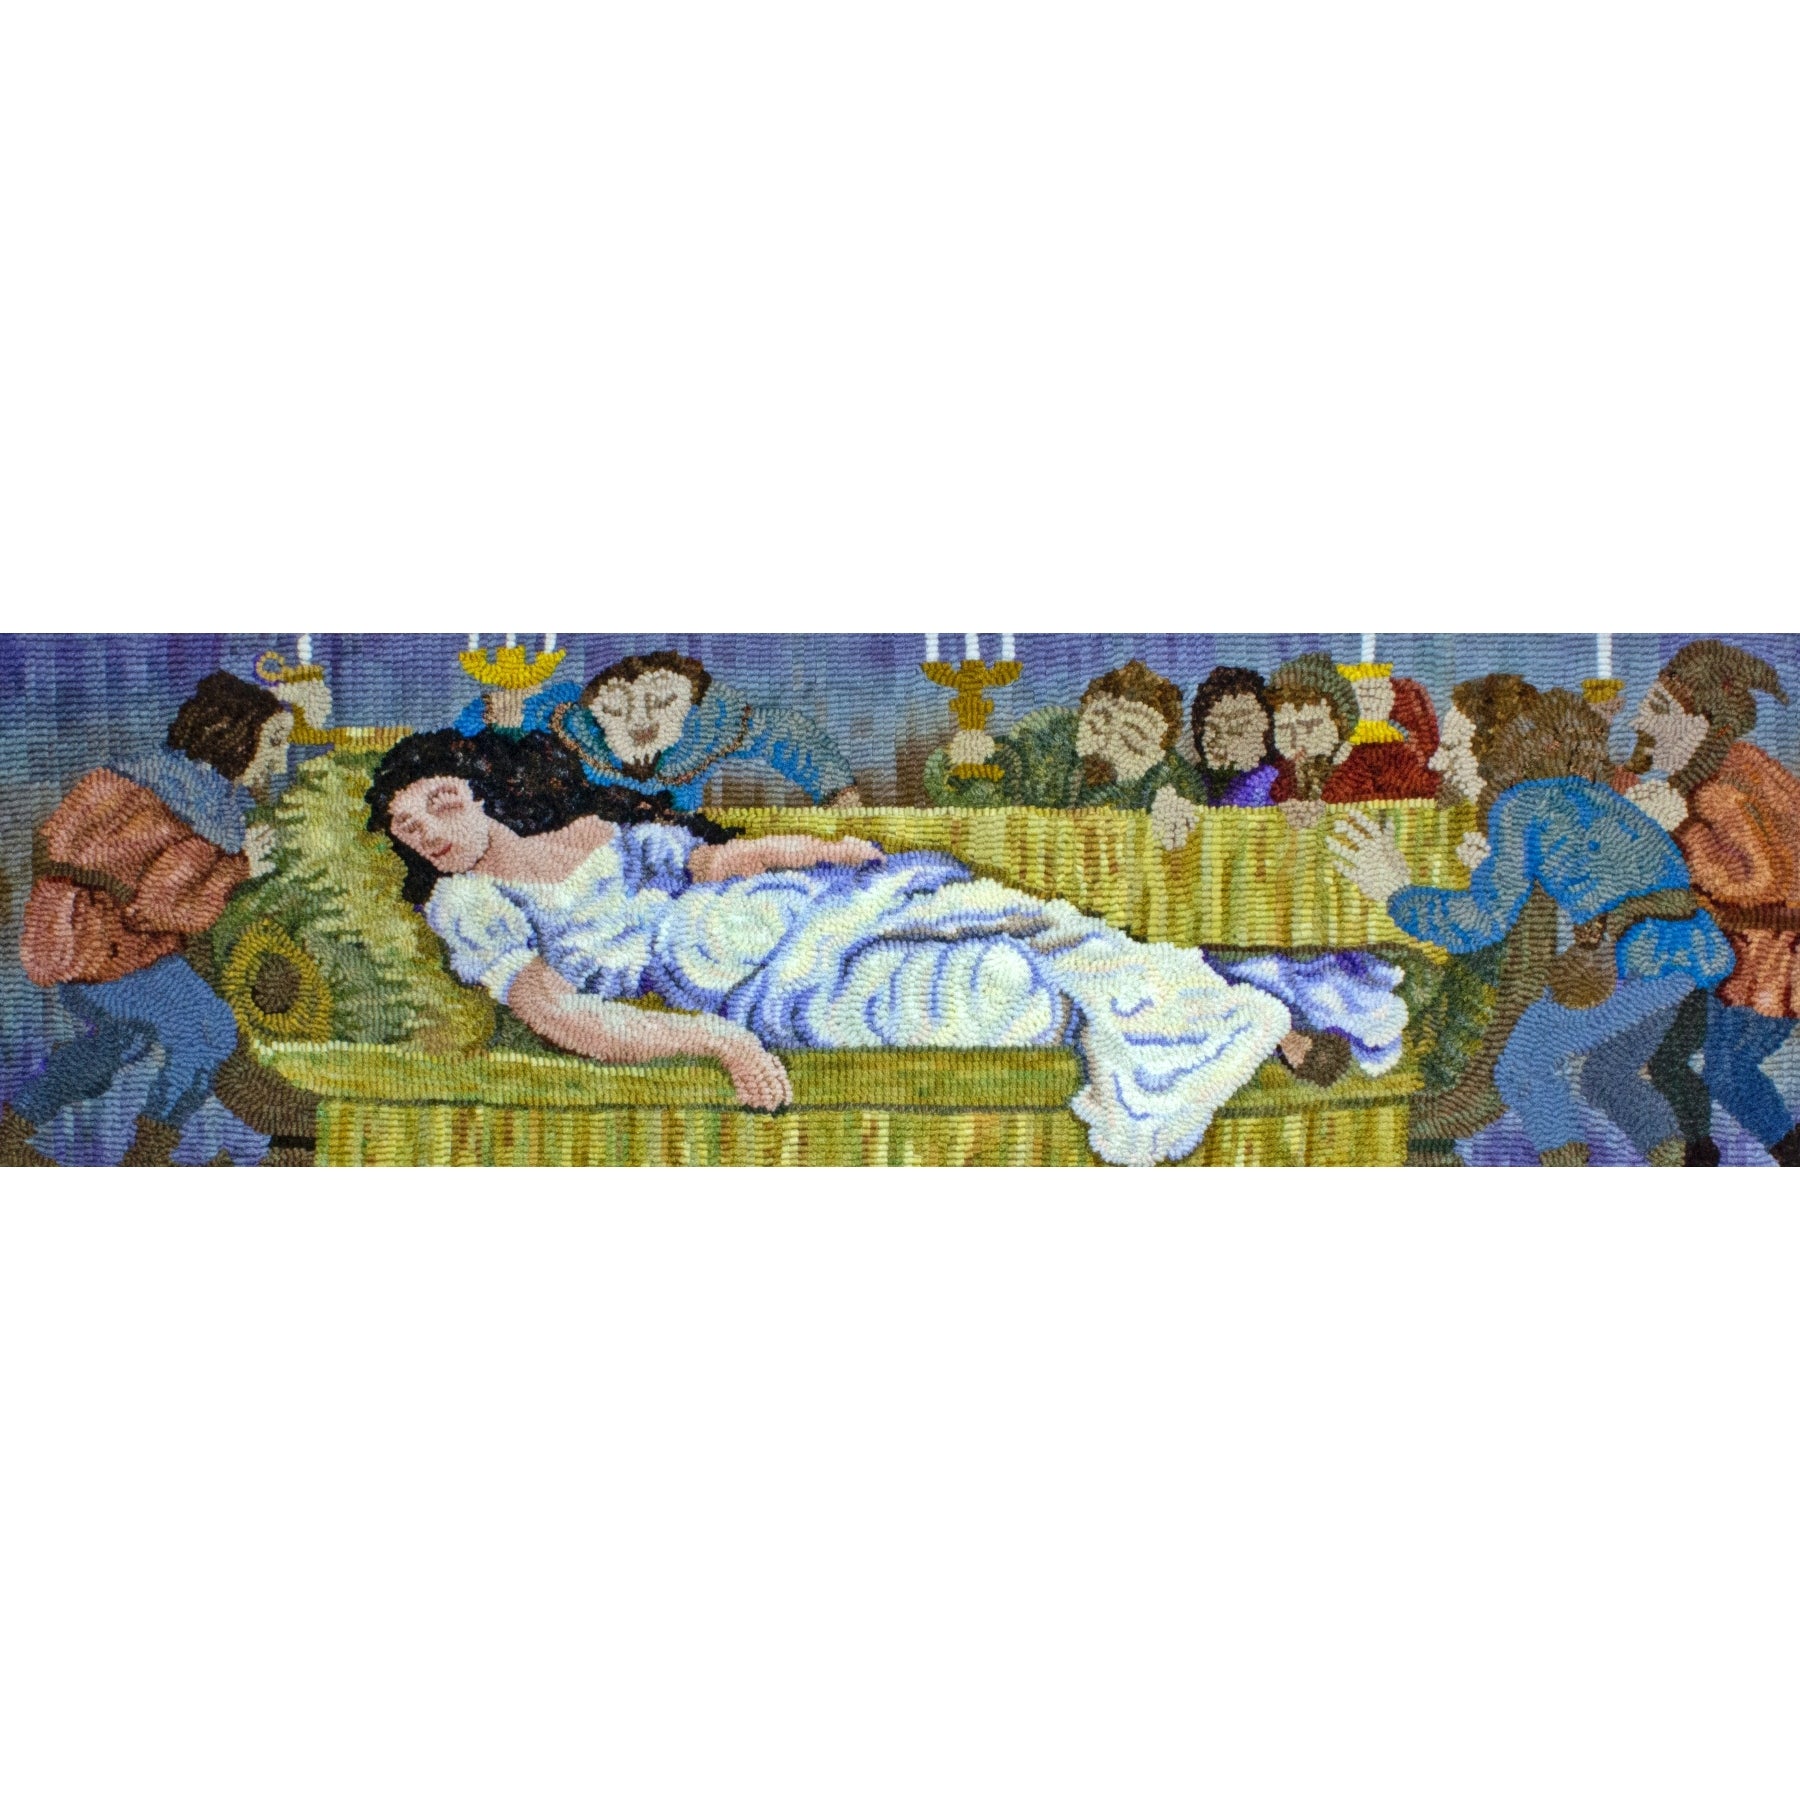 Snow White and the Seven Dwarfs, ill. Walter Crane, 1866, rug hooked by Julie Reilly